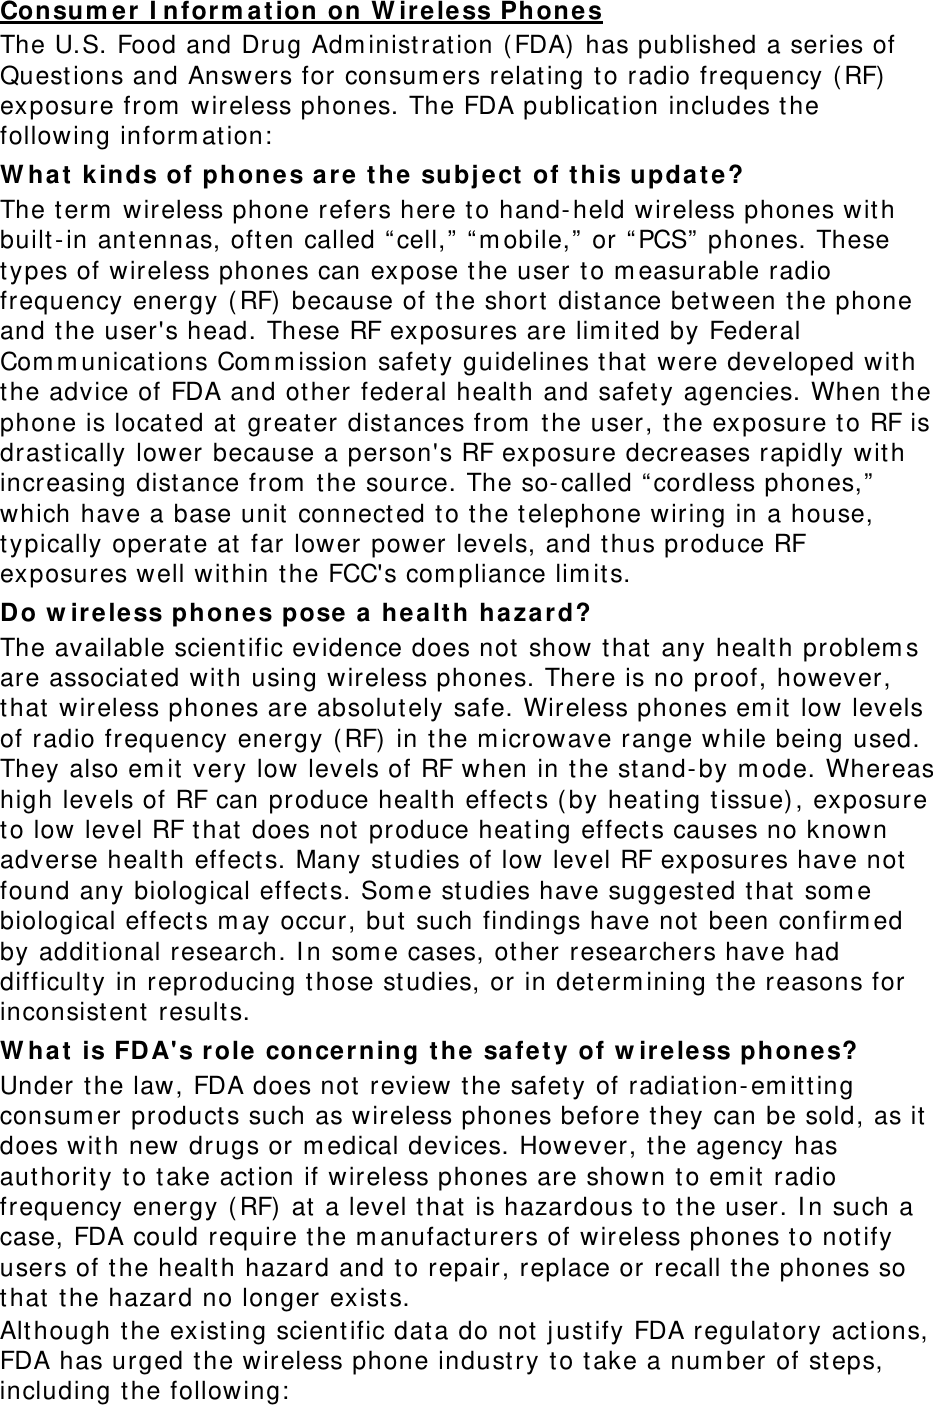 Consum e r  I nform at ion  on W irele ss Phones The U.S. Food and Drug Adm inistrat ion ( FDA)  has published a series of Quest ions and Answers for consum ers relat ing t o radio frequency ( RF) exposure from  wireless phones. The FDA publication includes the following inform at ion:  W hat  k inds of phones are t he subject  of t his updat e? The t erm  wireless phone refers here t o hand- held wireless phones with built- in antennas, oft en called “ cell,” “ m obile,” or “ PCS”  phones. These types of wireless phones can expose t he user t o m easurable radio frequency energy ( RF)  because of the short dist ance between t he phone and t he user&apos;s head. These RF exposures are lim it ed by Federal Com m unicat ions Com m ission safet y guidelines that were developed wit h the advice of FDA and ot her federal health and safet y agencies. When t he phone is located at  great er dist ances from  t he user, t he exposure to RF is drastically lower because a person&apos;s RF exposure decreases rapidly wit h increasing dist ance from  t he source. The so- called “ cordless phones,”  which have a base unit connect ed t o t he t elephone wiring in a house, typically operat e at  far lower power levels, and t hus produce RF exposures well wit hin the FCC&apos;s com pliance lim it s. Do w ir e less phones pose  a  healt h ha zard? The available scient ific evidence does not  show t hat any healt h problem s are associat ed wit h using wireless phones. There is no proof, however, that  wireless phones are absolutely safe. Wireless phones em it  low levels of radio frequency energy ( RF) in t he m icrowave range while being used. They also em it  very low levels of RF when in t he st and- by m ode. Whereas high levels of RF can produce healt h effect s ( by heat ing t issue) , exposure to low level RF t hat does not  produce heat ing effect s causes no known adverse healt h effect s. Many studies of low level RF exposures have not  found any biological effect s. Som e st udies have suggest ed t hat  som e biological effect s m ay occur, but such findings have not  been confirm ed by addit ional research. I n som e cases, ot her researchers have had difficult y in reproducing t hose st udies, or in det erm ining t he reasons for inconsist ent  result s. W hat  is FDA&apos;s role  concerning t he safety of w ireless phones? Under the law, FDA does not  review the safet y of radiat ion- em itt ing consum er product s such as wireless phones before t hey can be sold, as it does wit h new drugs or m edical devices. However, t he agency has aut hority t o t ake action if wireless phones are shown to em it  radio frequency energy ( RF)  at  a level that  is hazardous t o t he user. I n such a case, FDA could require t he m anufact urers of wireless phones t o not ify users of t he healt h hazard and t o repair, replace or recall t he phones so that  the hazard no longer exist s. Although the existing scient ific dat a do not  just ify FDA regulatory actions, FDA has urged the wireless phone indust ry t o t ake a num ber of st eps, including the following:  